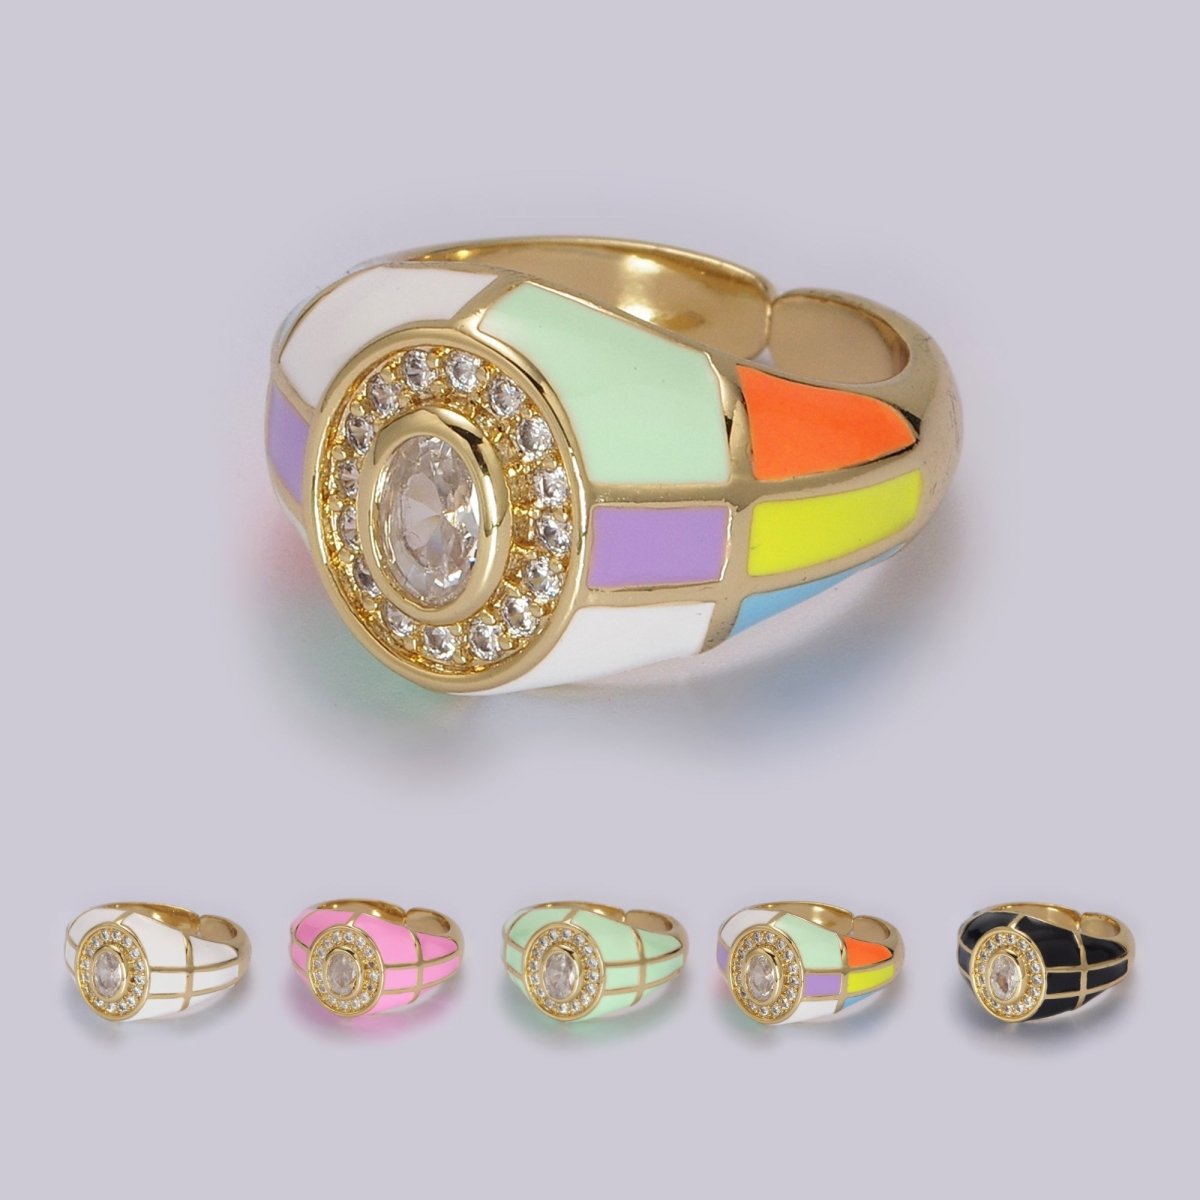 14K Gold Filled Chunky Colorful Ring • Dome Cocktail Ring • ENAMEL Pink Green Black White Ring U-137 ~ U-141 - DLUXCA